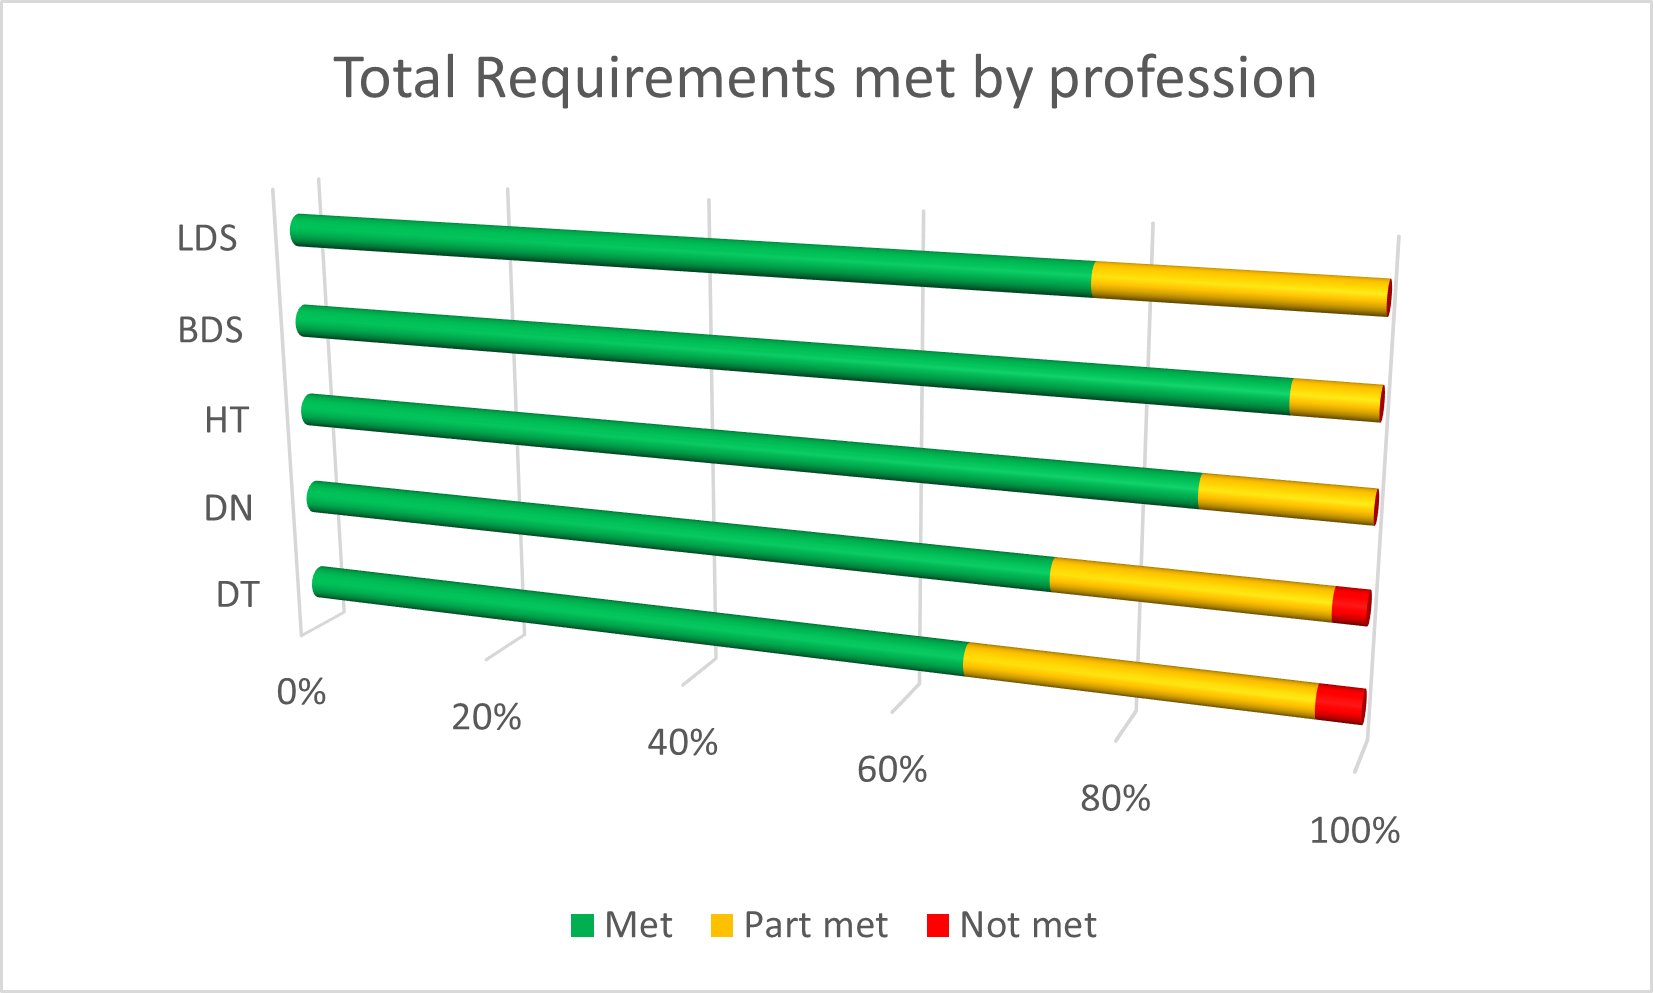 Bar chart showing total requirements met by profession